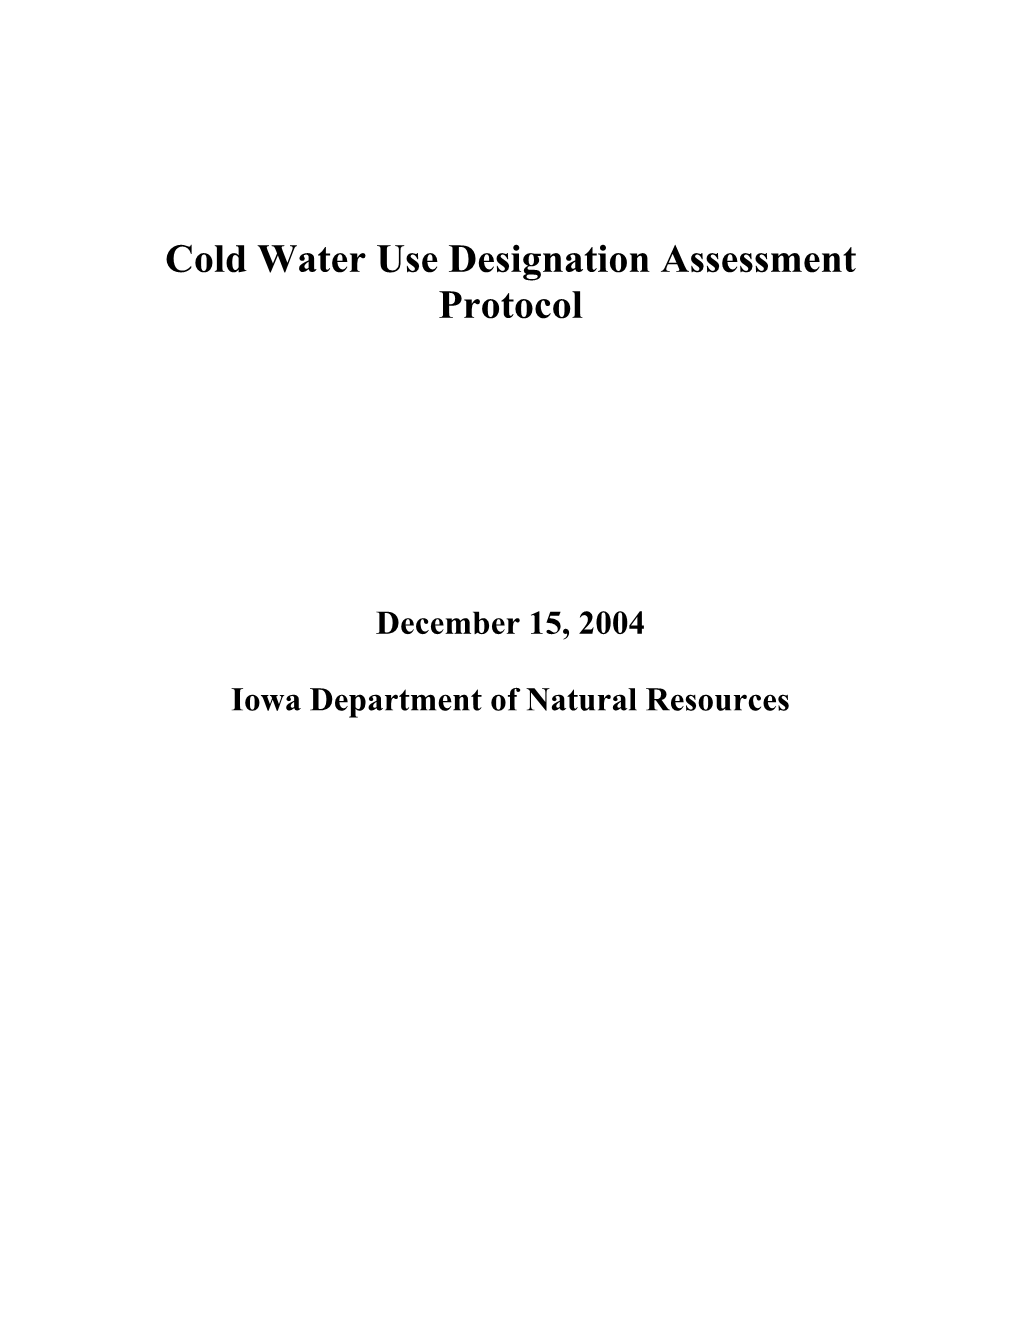 Cold Water Use Designation Assessment Protocol